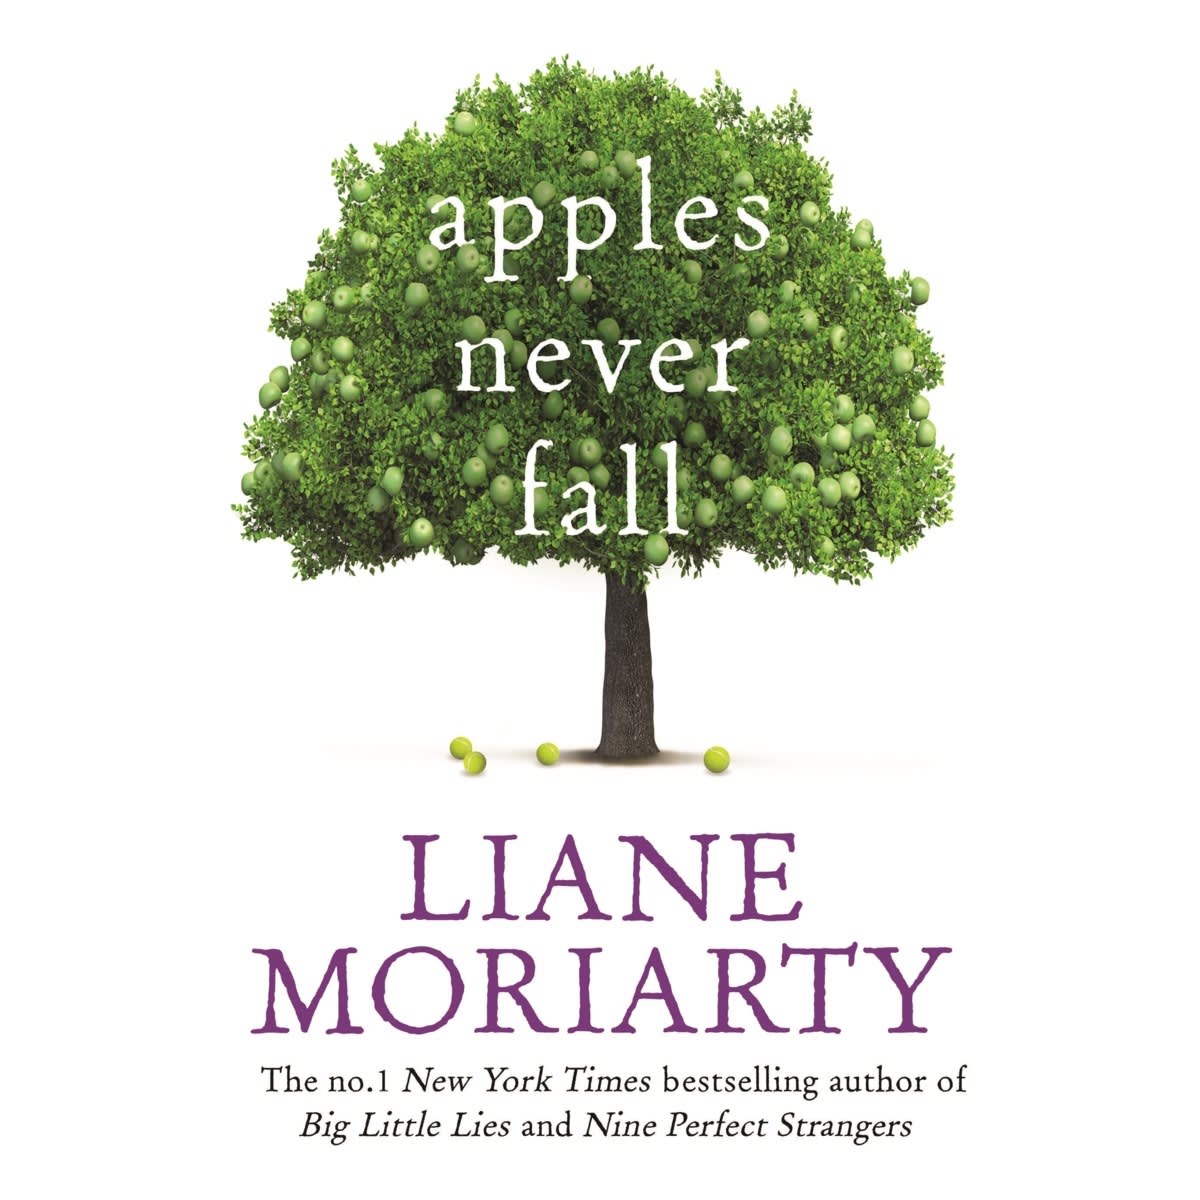 apples never fall by liane moriarty